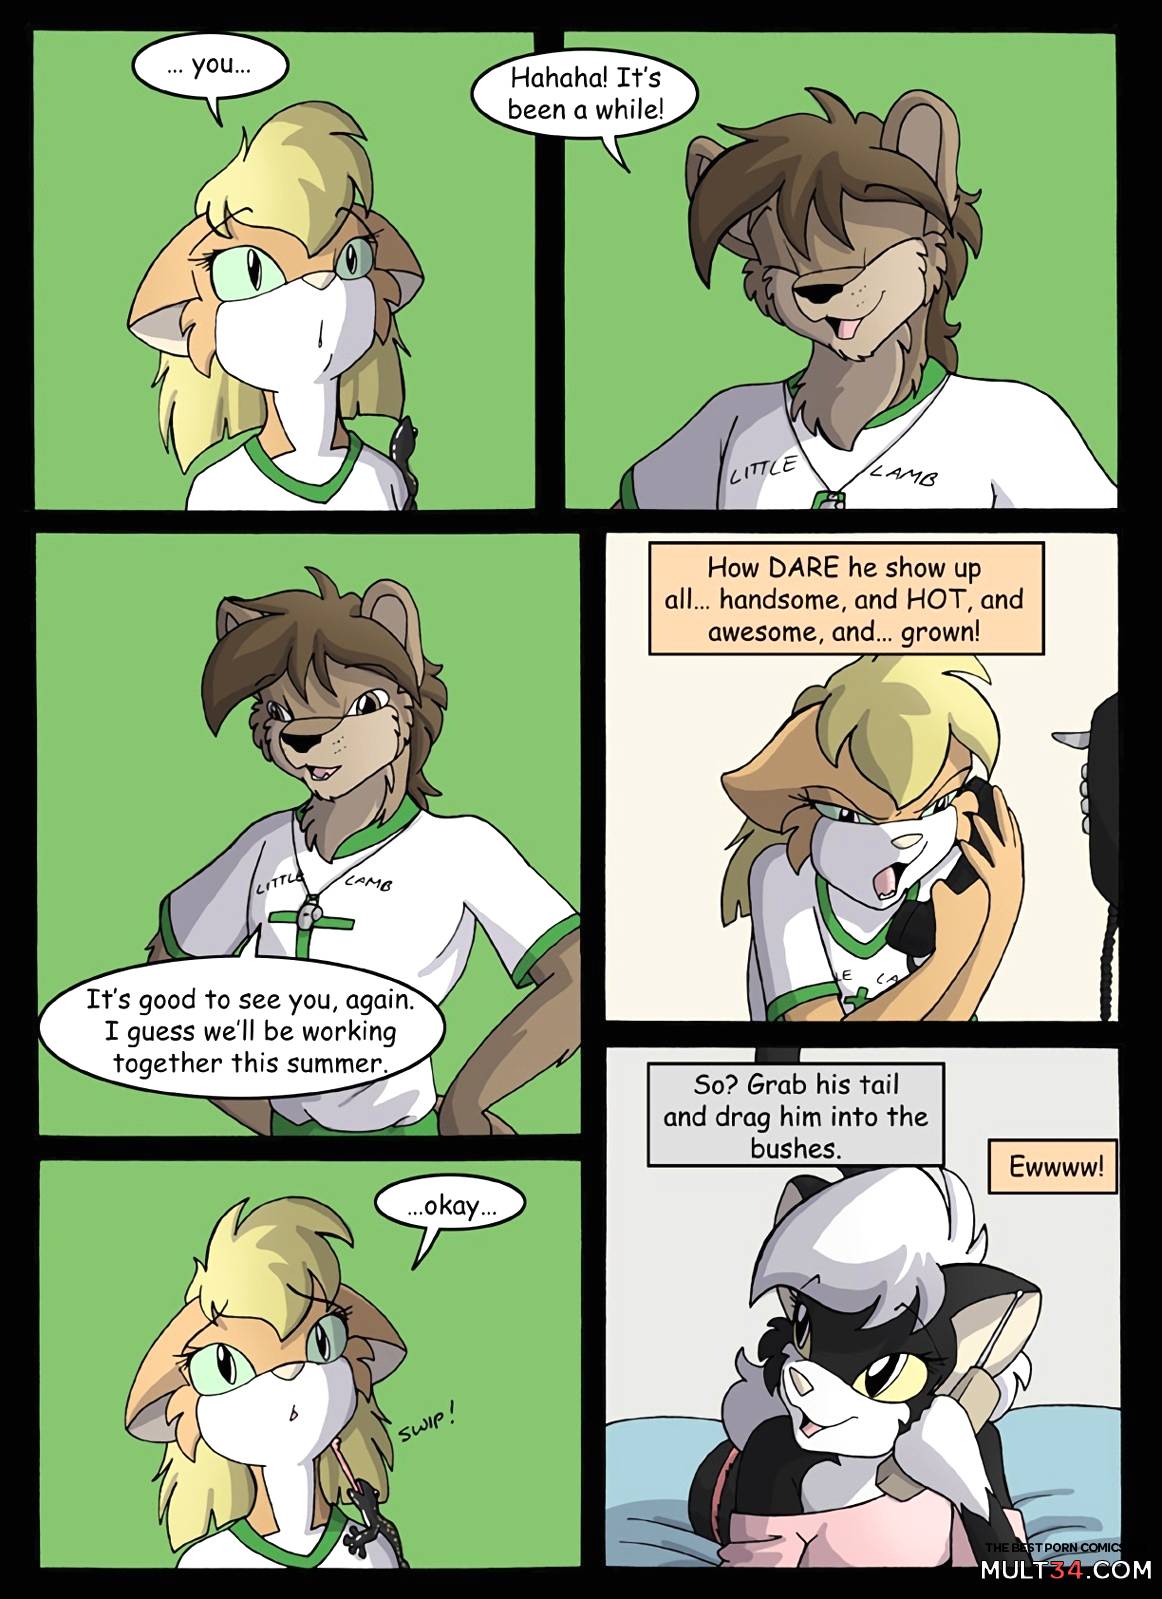 Amy's Little Lamb, Summer Camp Adventure page 4